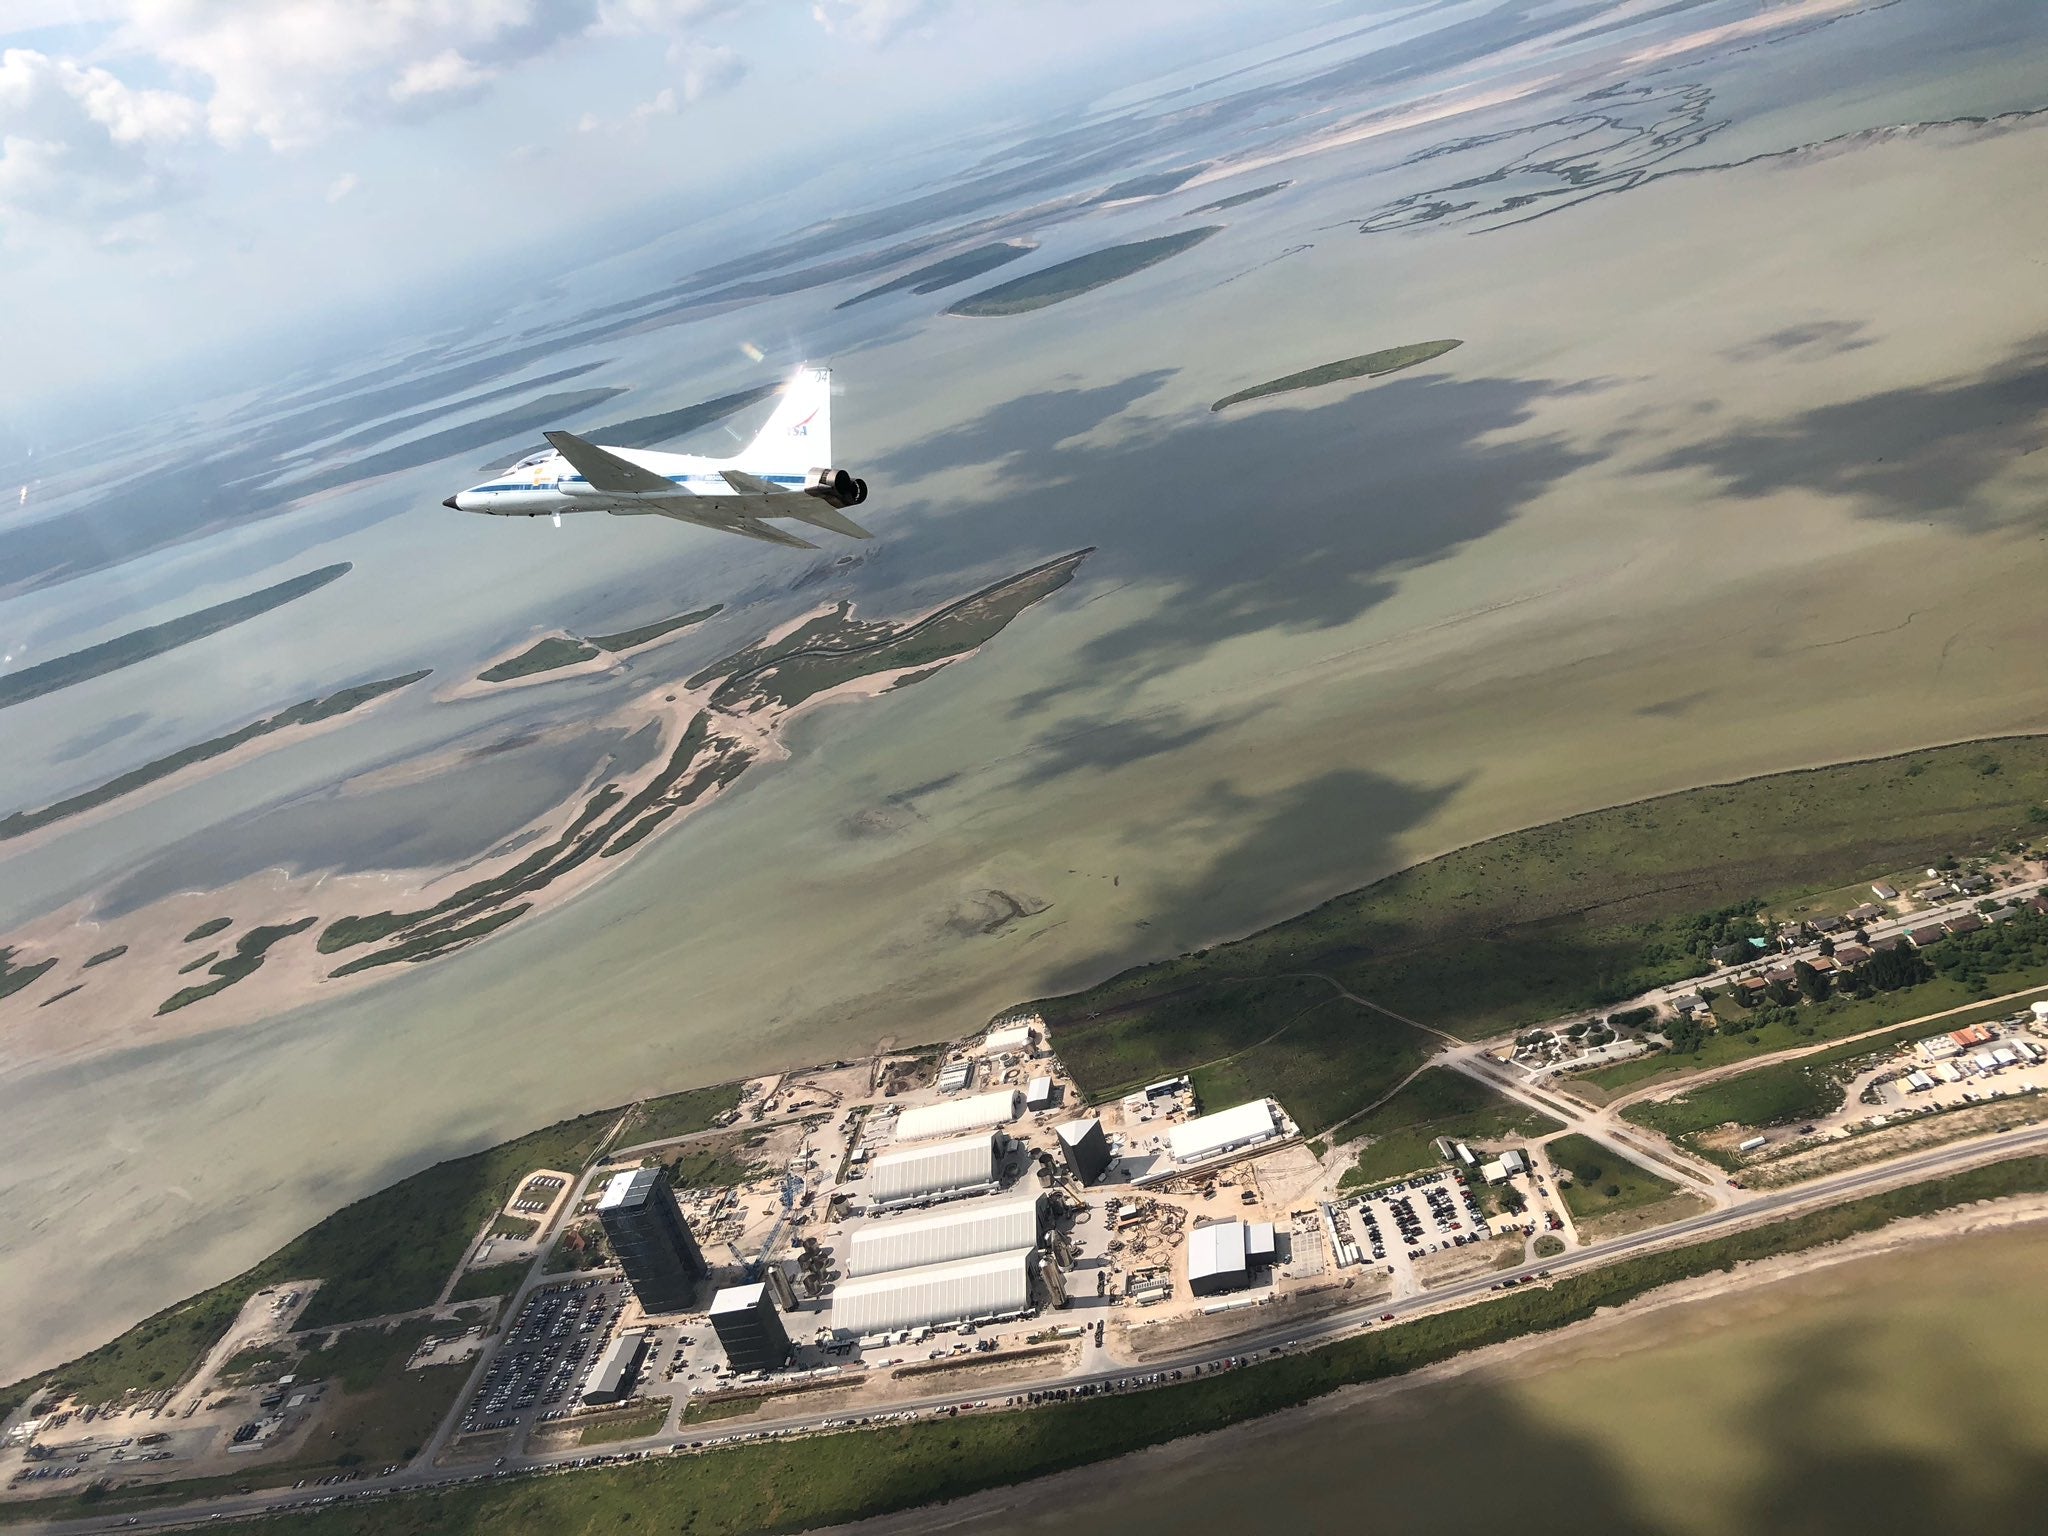 NASA Astronauts fly over SpaceX's Starship facility in South Texas